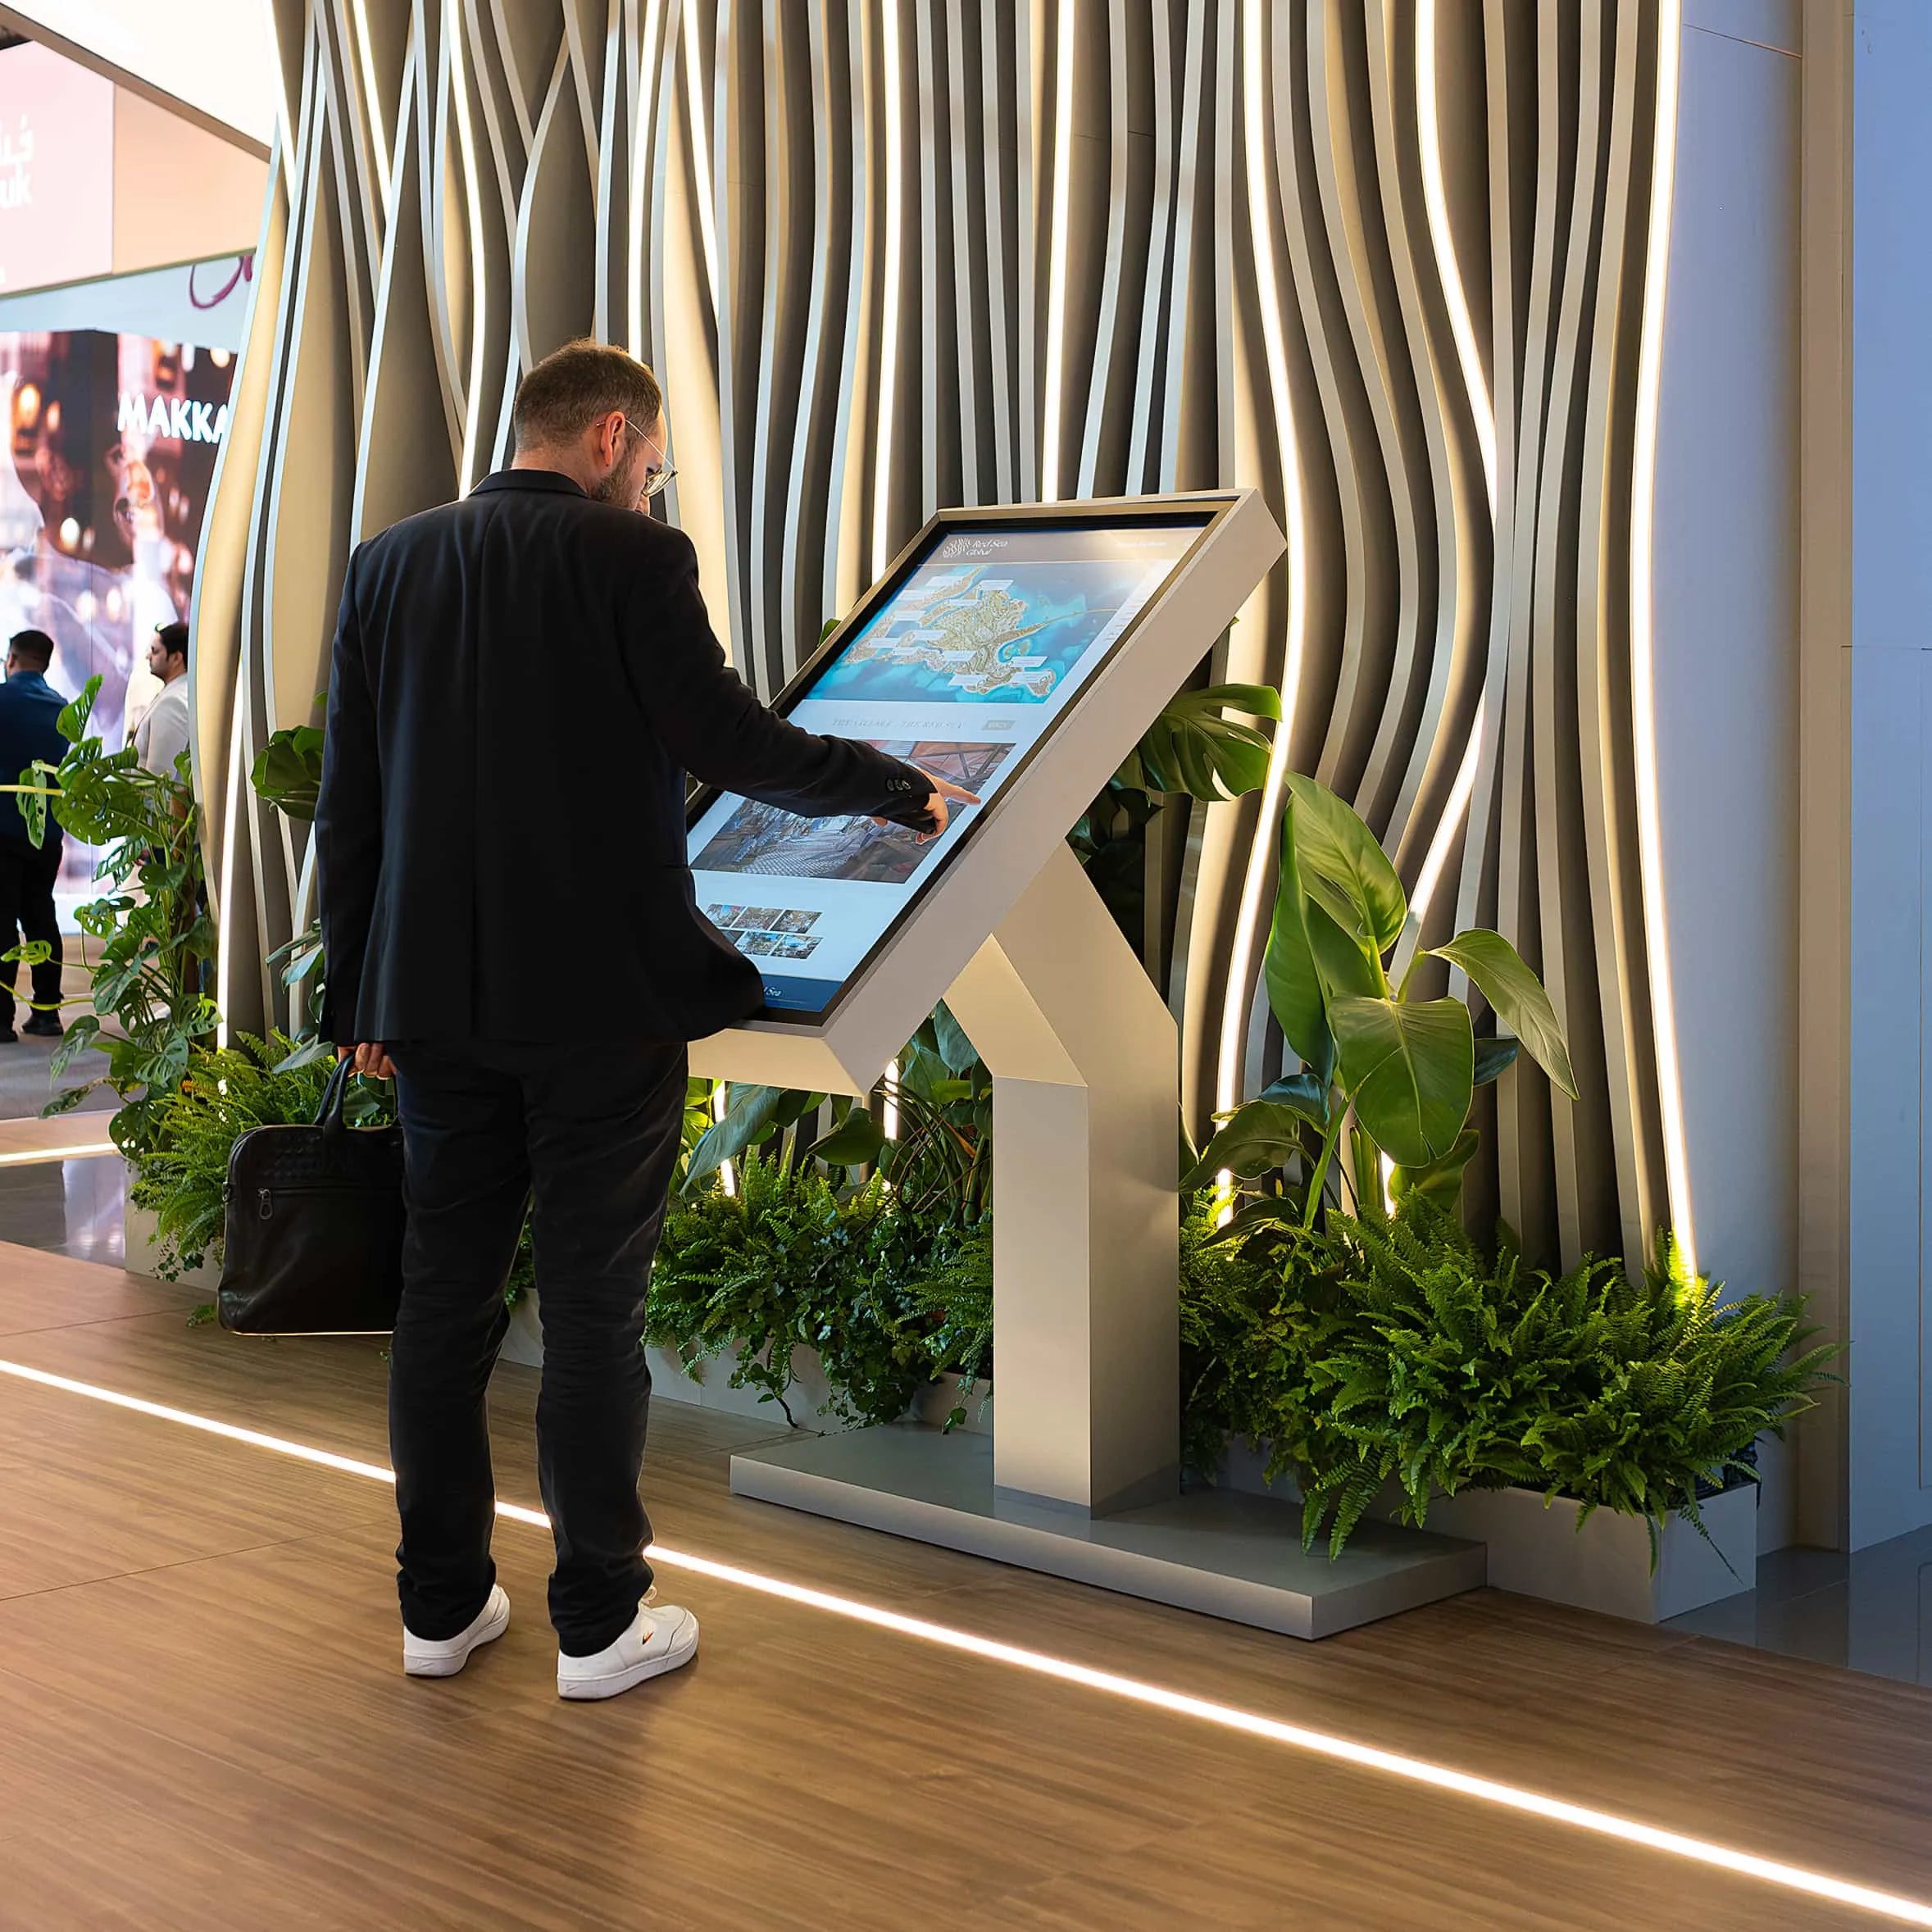 A modern interactive kiosk with a man in a black jacket and jeans browsing through a digital display stands prominently in a corporate event. Surrounding the kiosk are lush green ferns. Intersperse between the sleek, vertical, wavy lines of the sculptural backdrop illuminated by warm, ambient lighting stand large, vibrant green plants hired for the exhibition, curated by Amaranté London event florist. These plants for the exhibition create a refreshing and engaging atmosphere within the business setting.